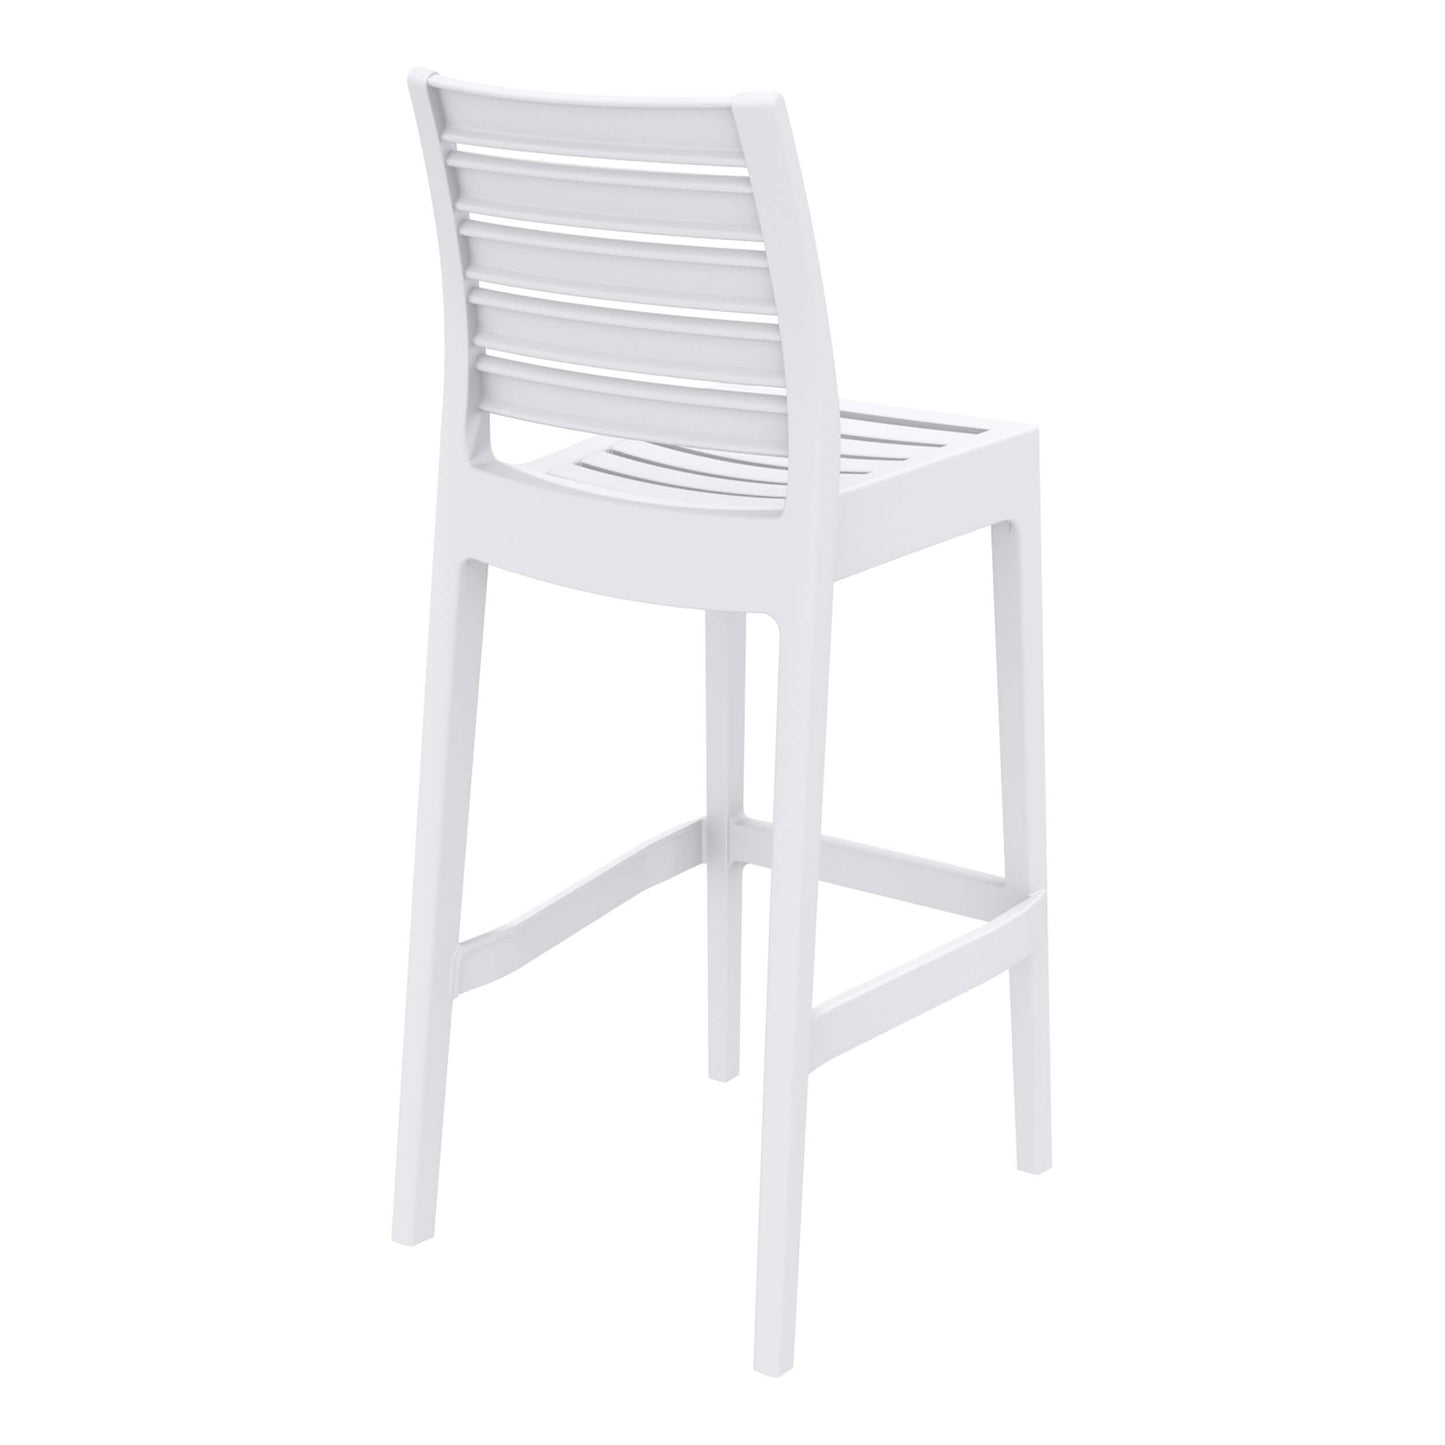 Sunnyhill | Modern Plastic Outdoor Bar Stools | Set Of 4 | White